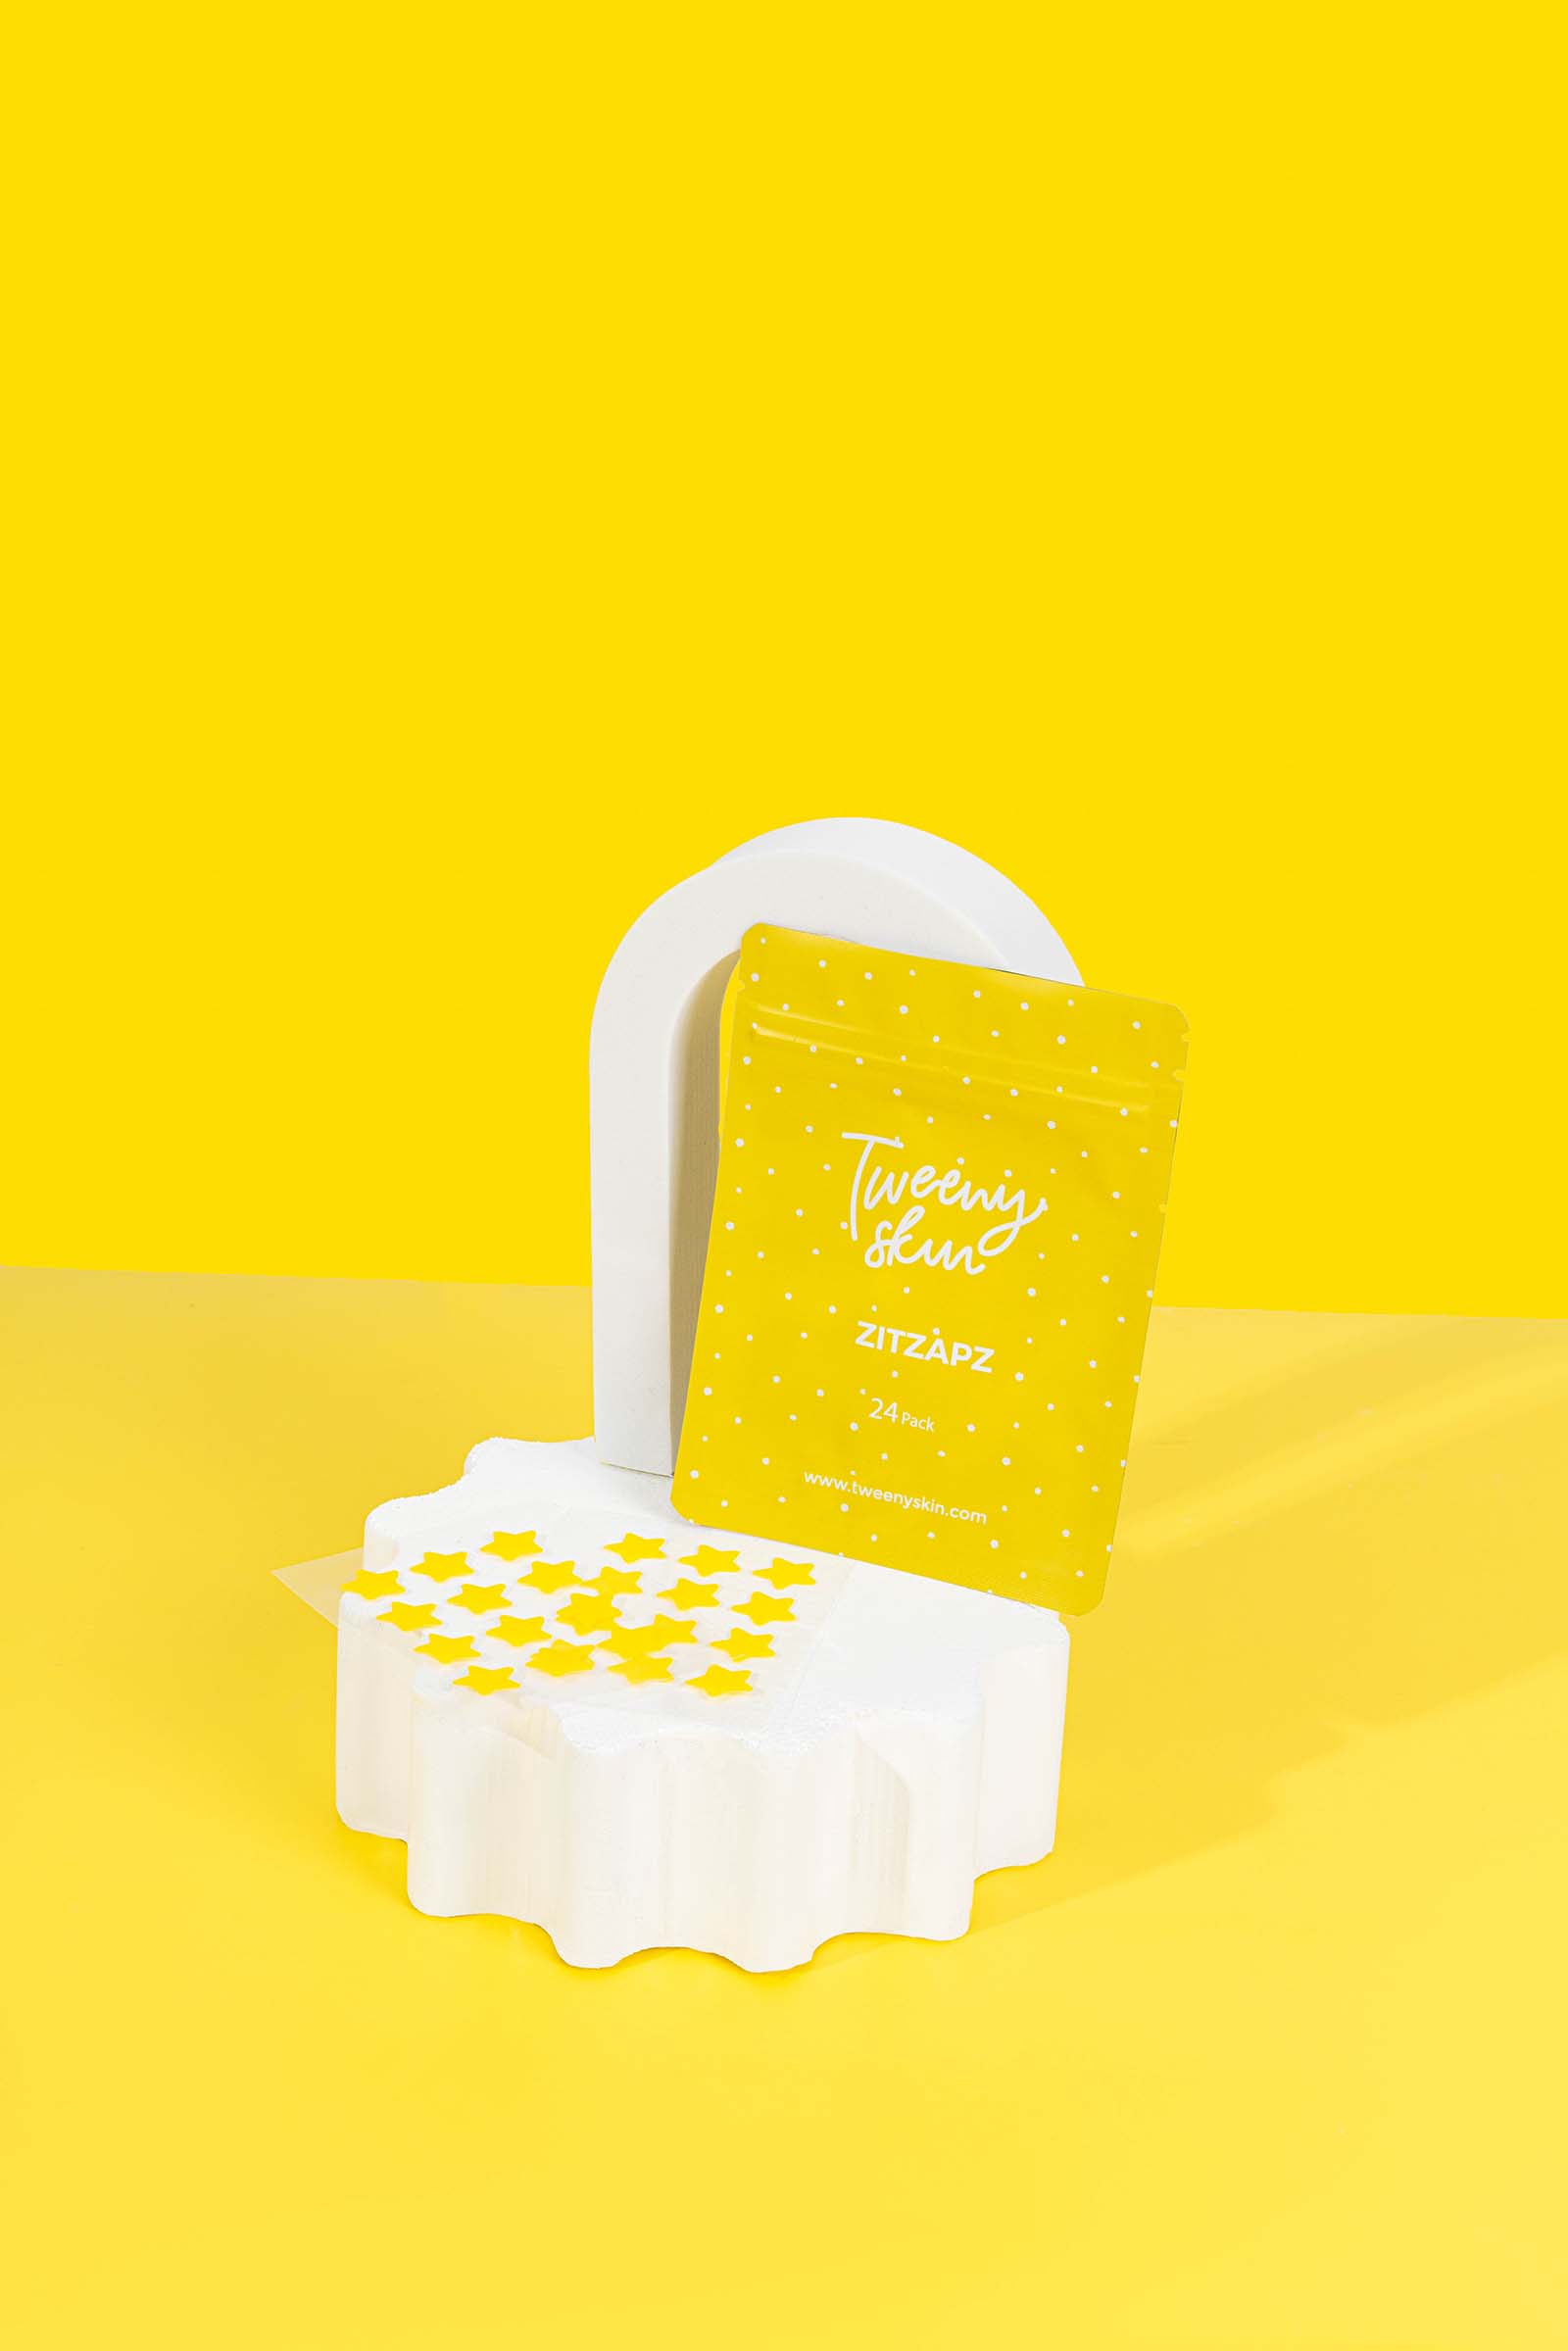 Yellow and Bright Product Photos for a Skincare Brand